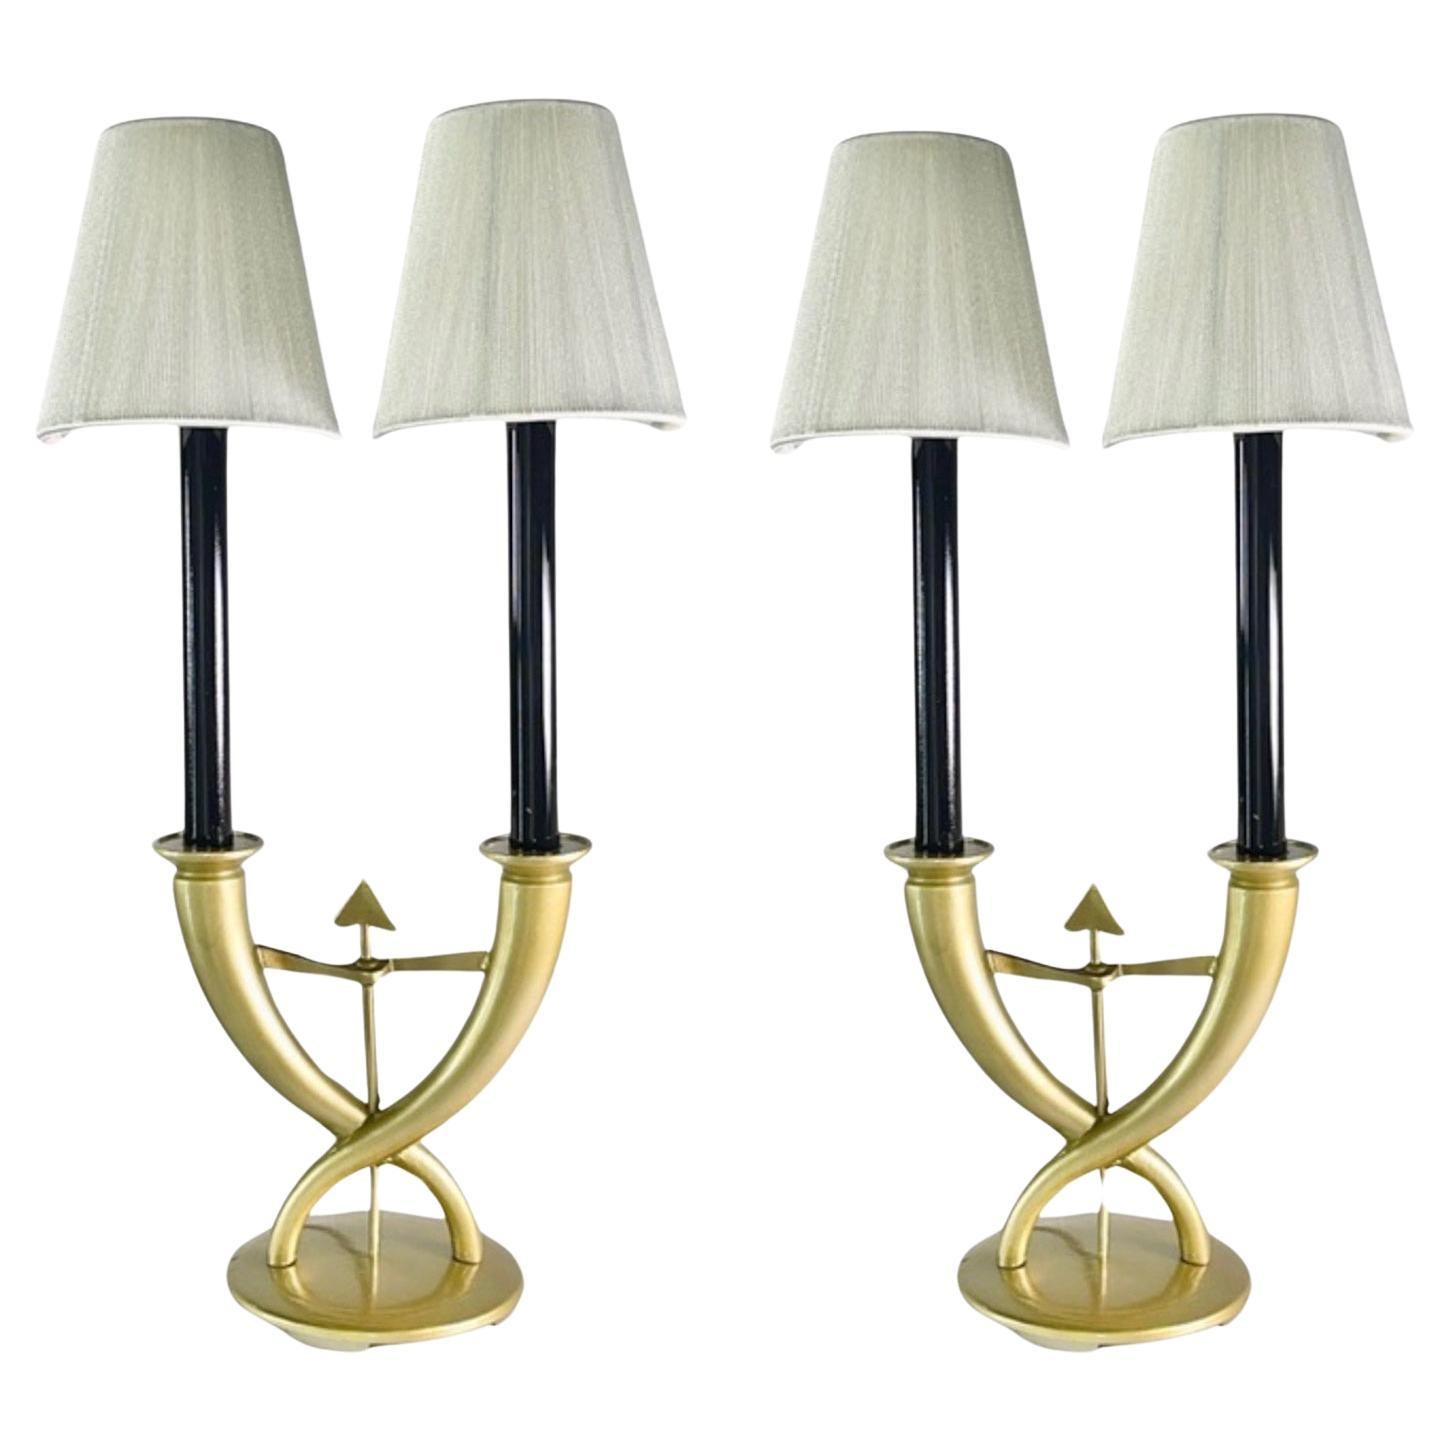 Pair of Gio Ponti Candelabra Fleche Lamps For Sale